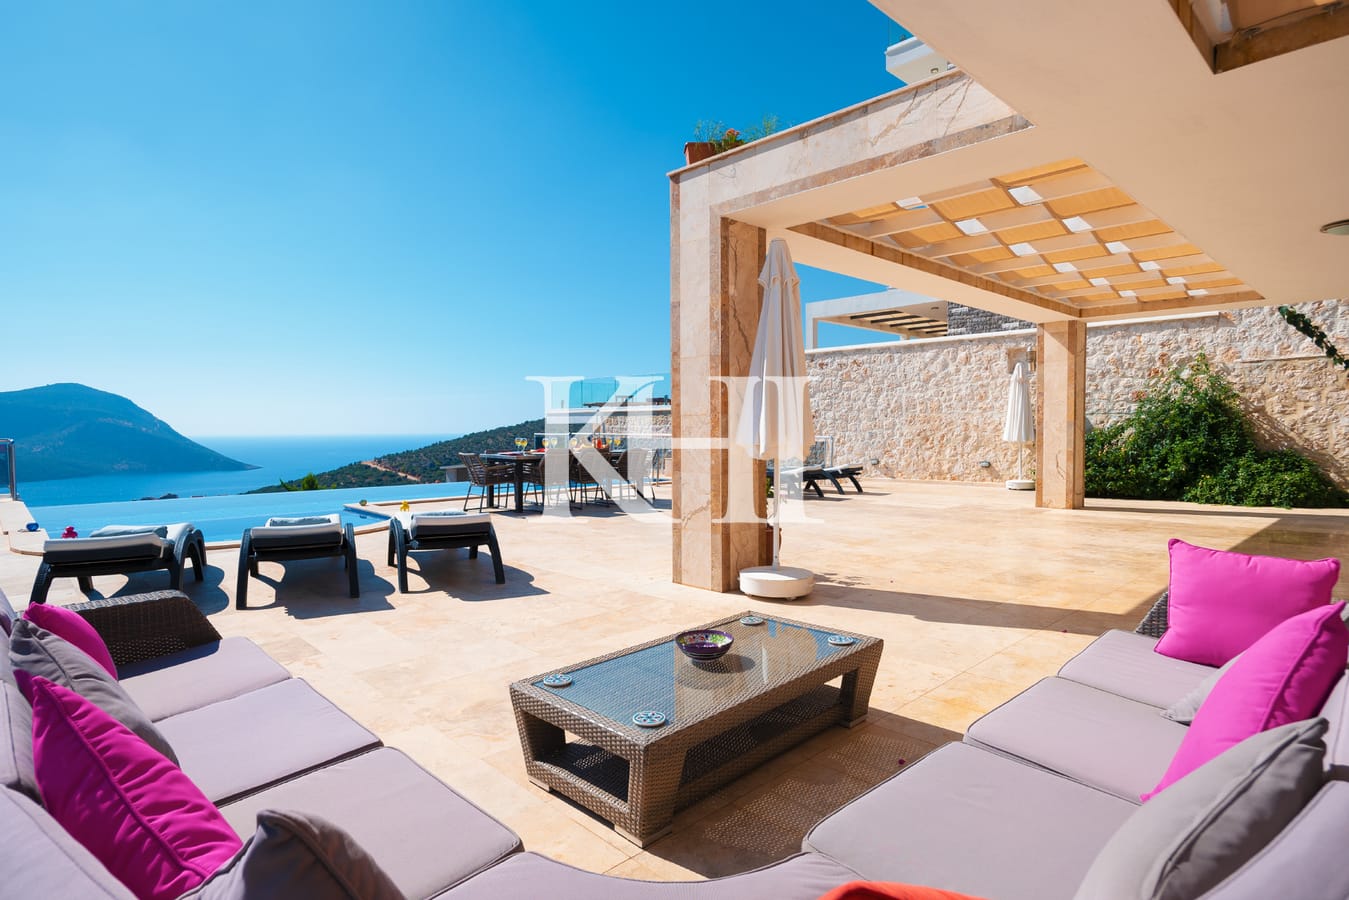 Detached Villa For Sale With Panoramic Kalkan View Slide Image 21